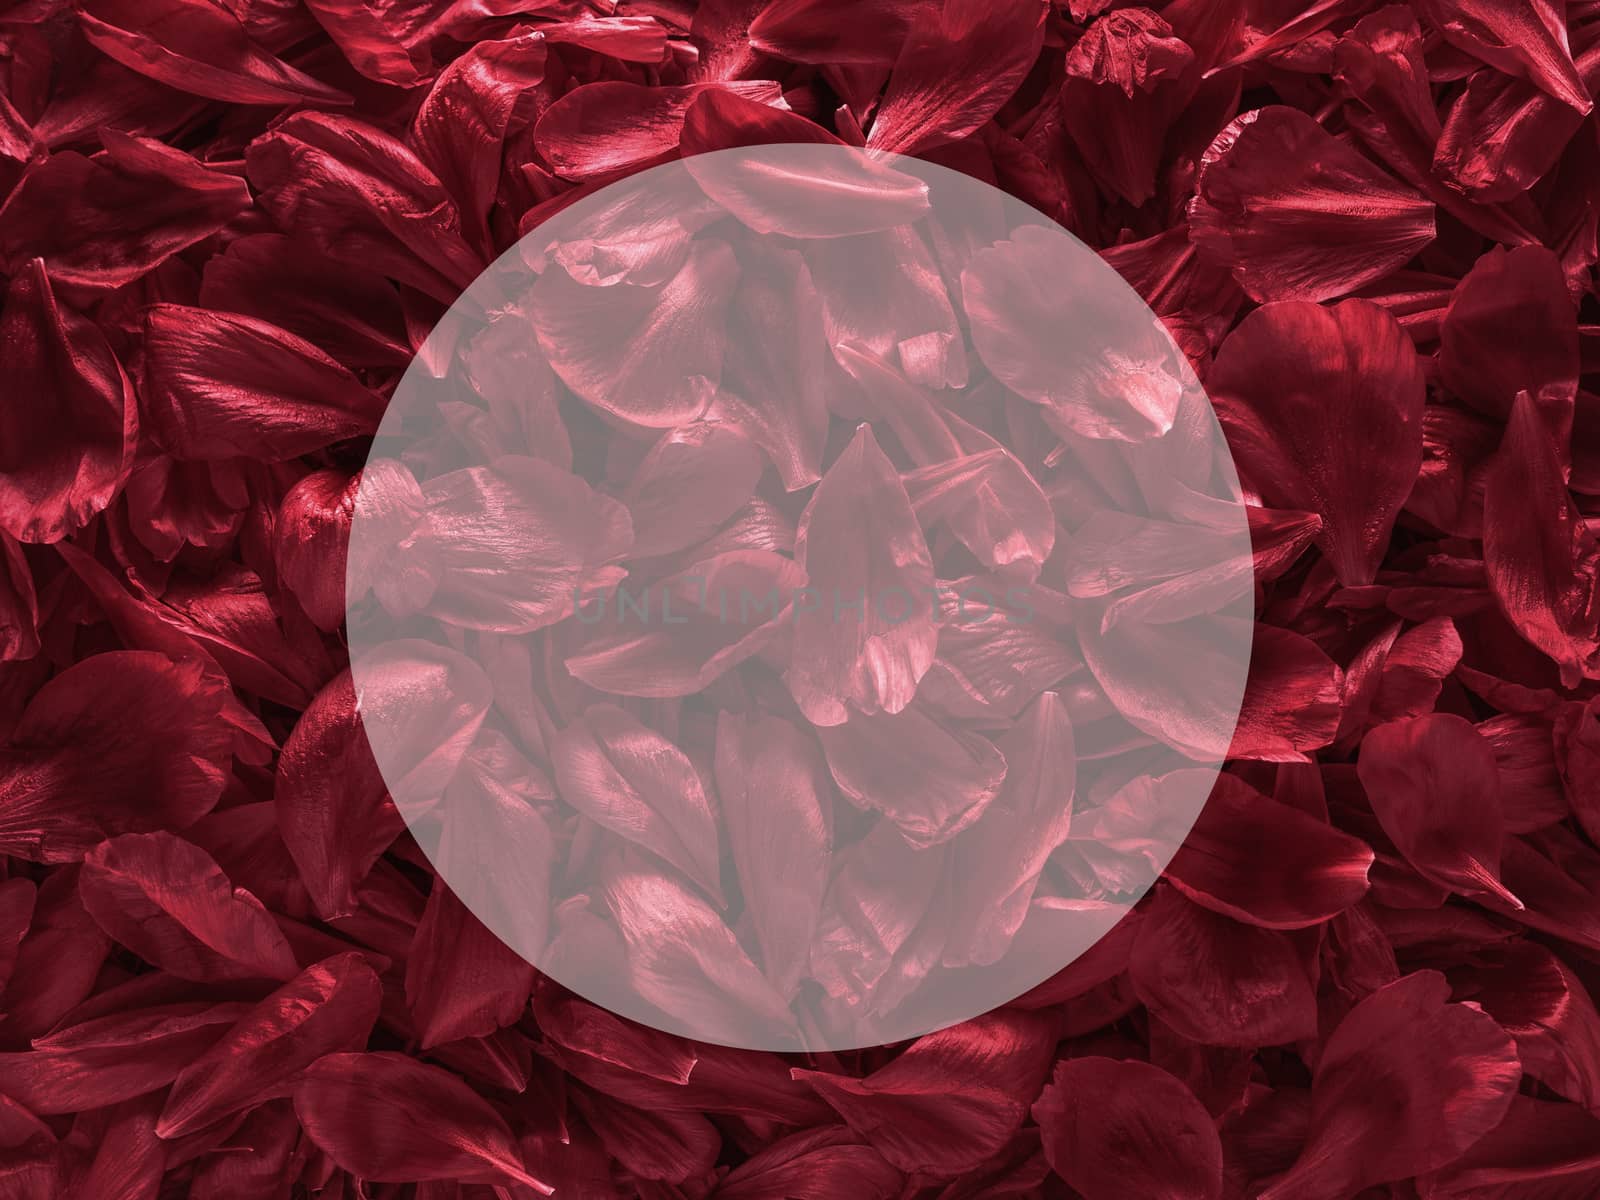 Background of red burgundy peony petals by fascinadora